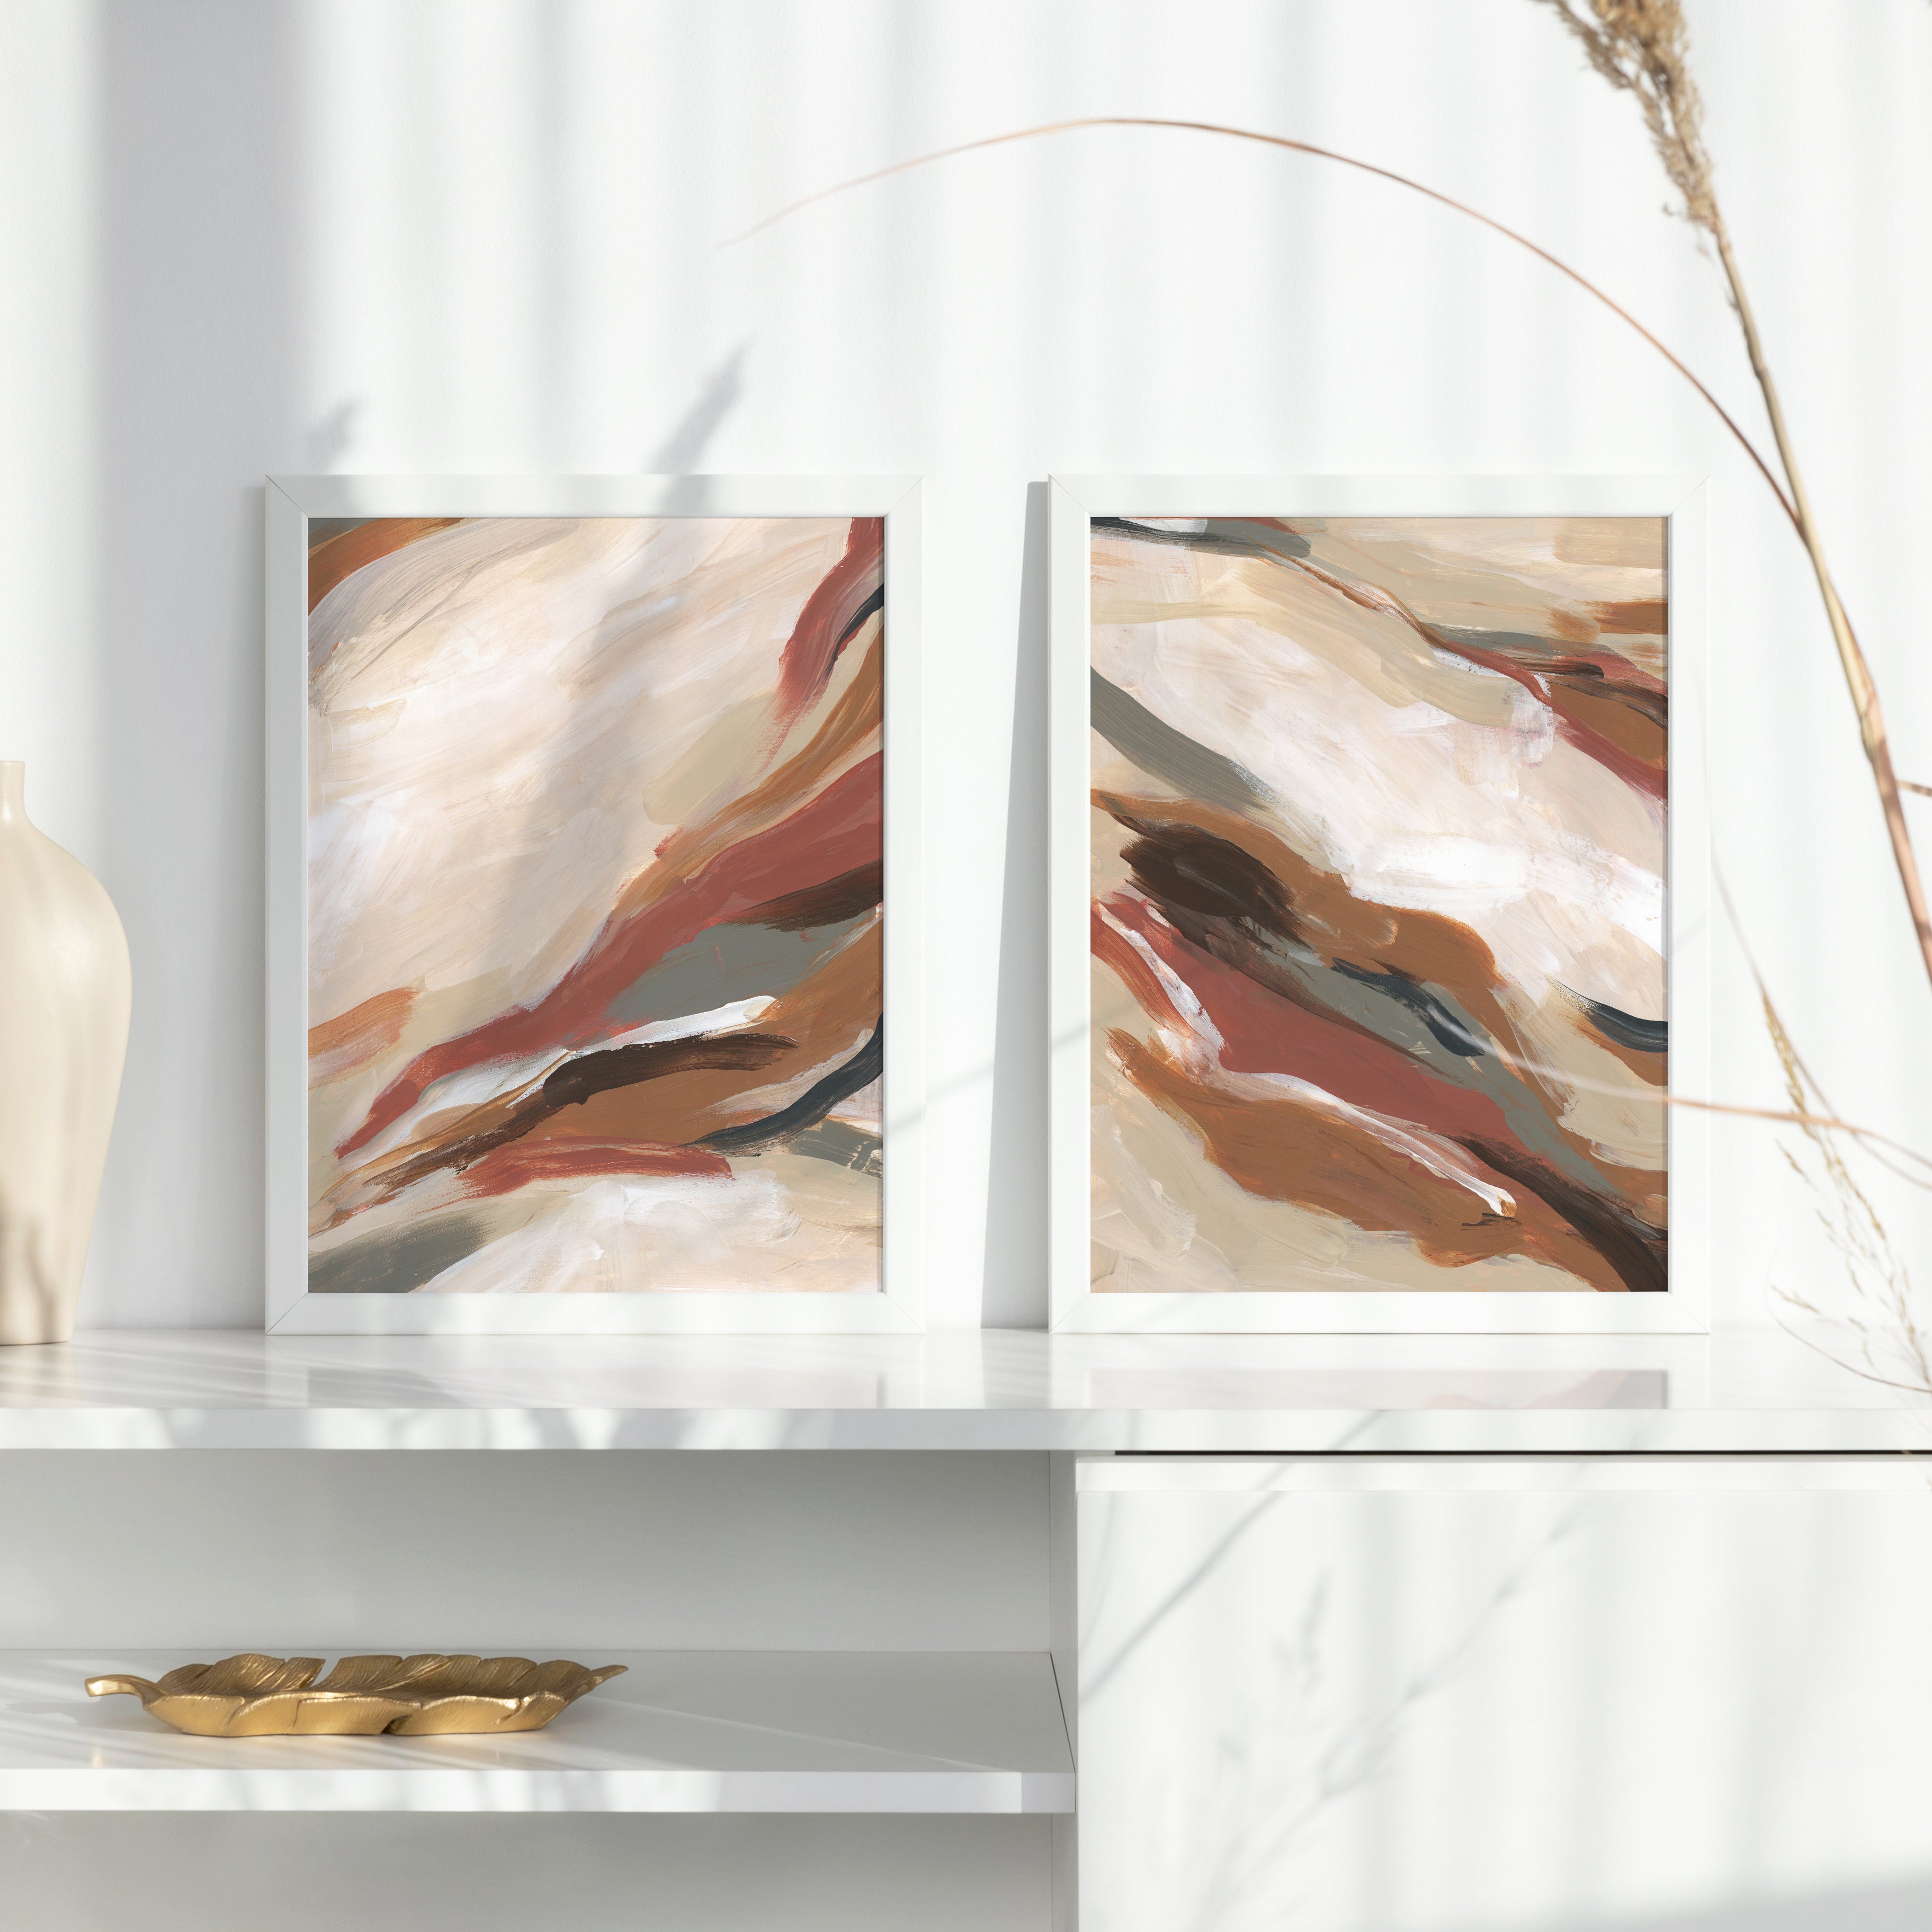 Abstract Earth Tones Paintings - Set of 2 - Art Prints or Canvases